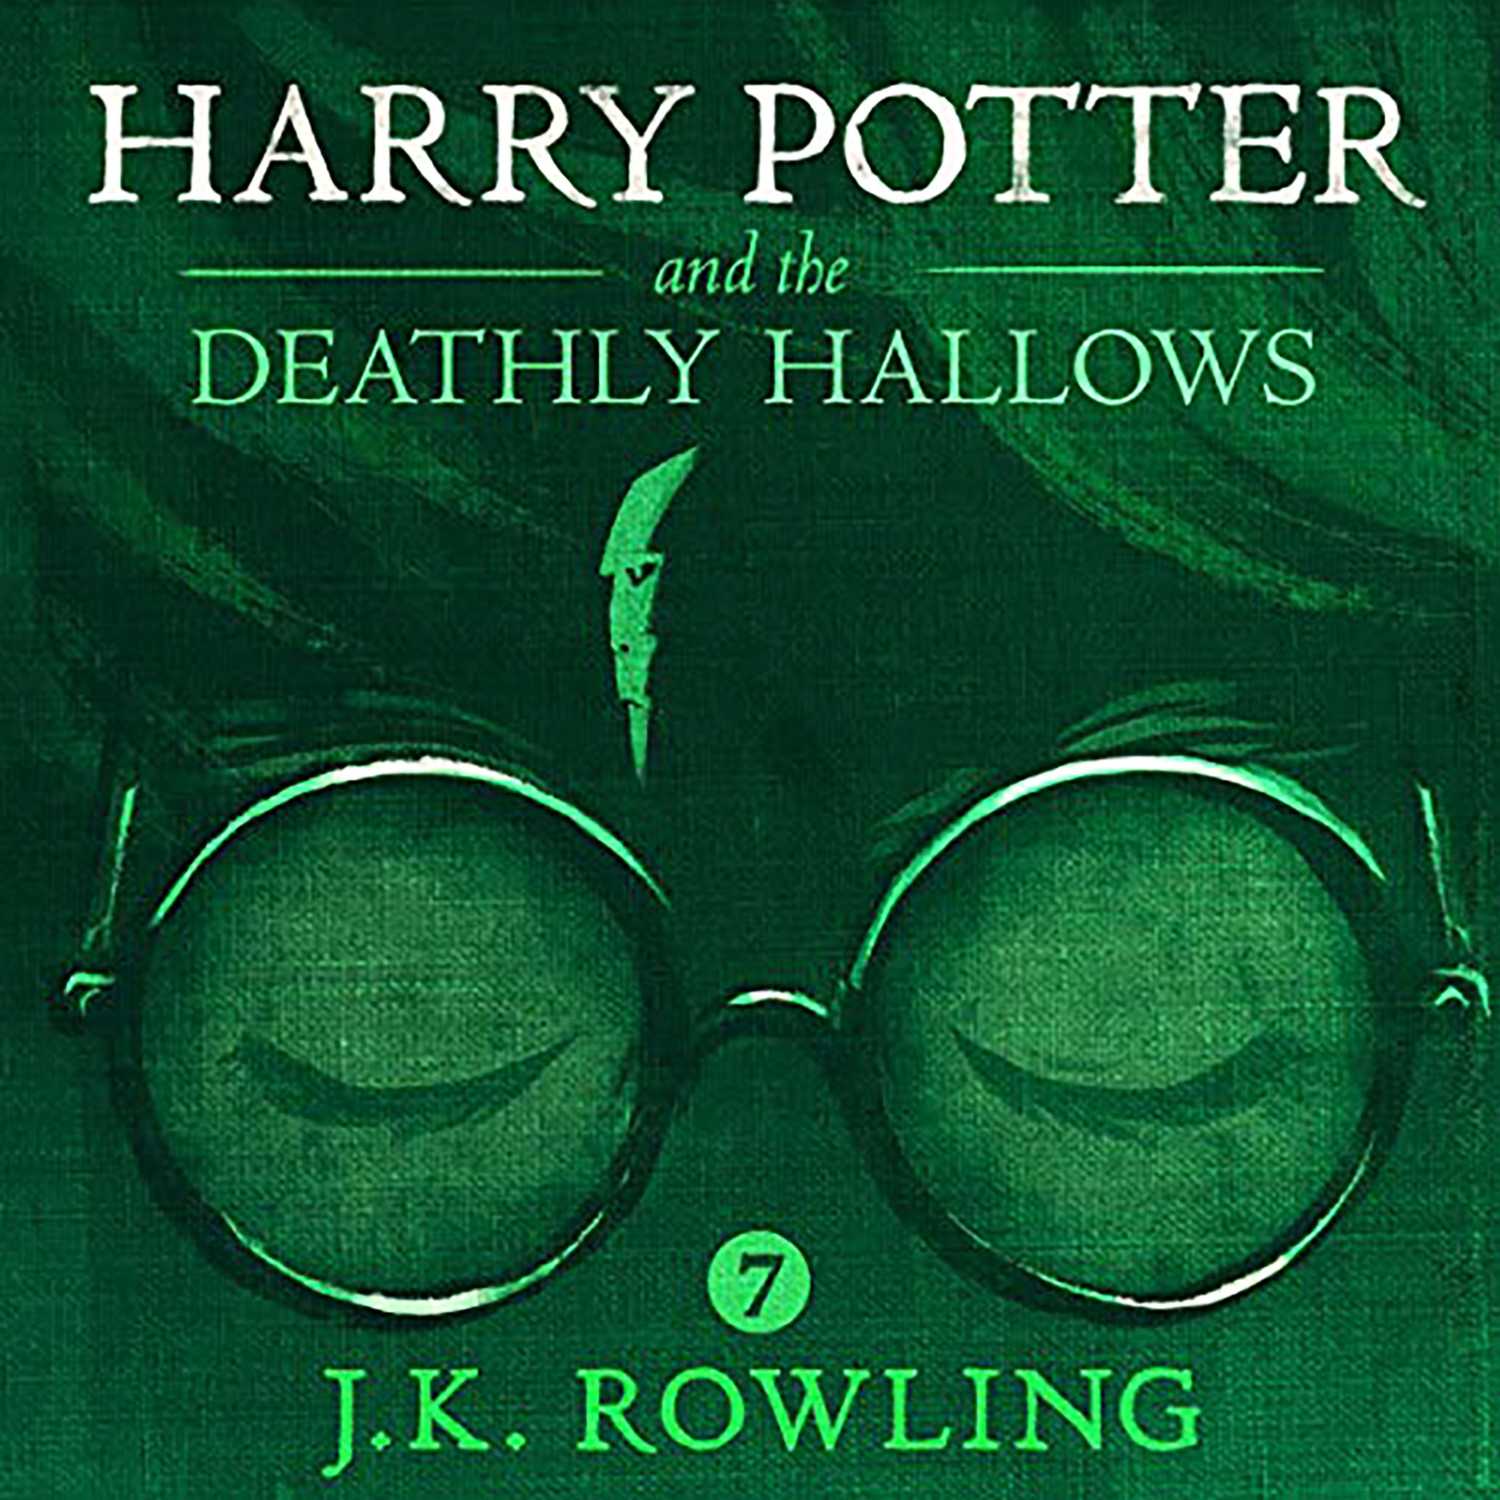 Harry Potter and the Deathly Hallows Part 3